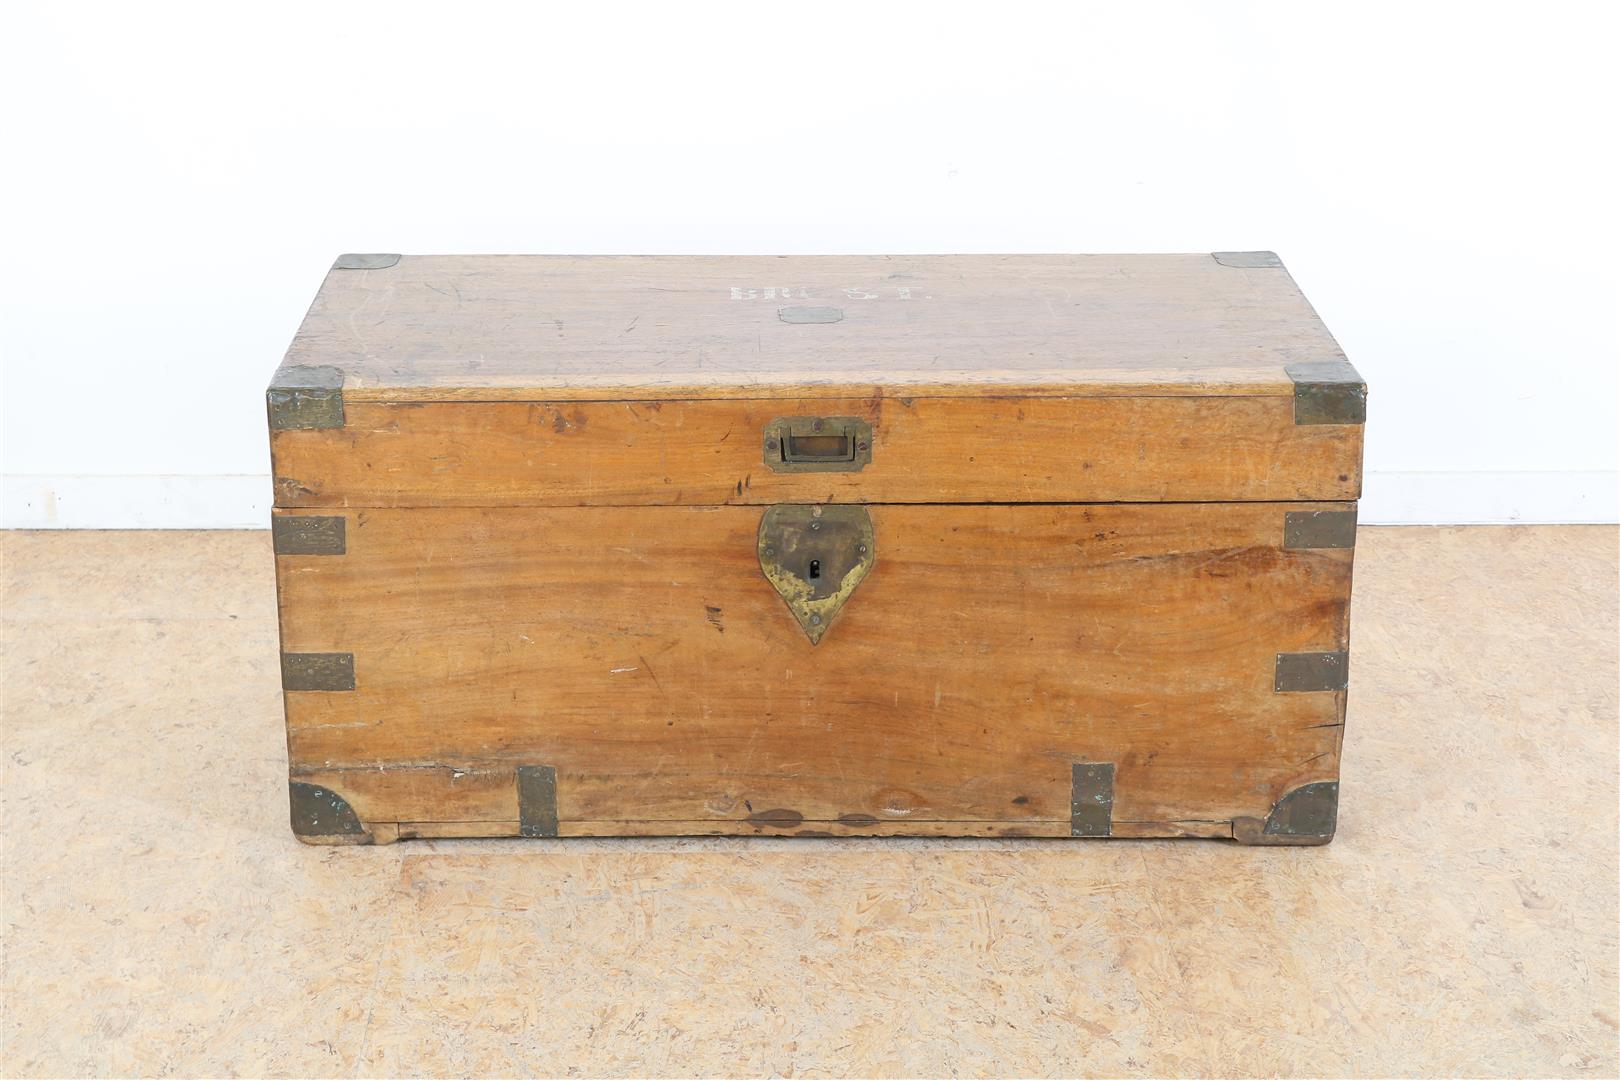 Teak camphor Colonial travel chest with copper lock plates and ornaments, 49 x 84 x 42 cm.